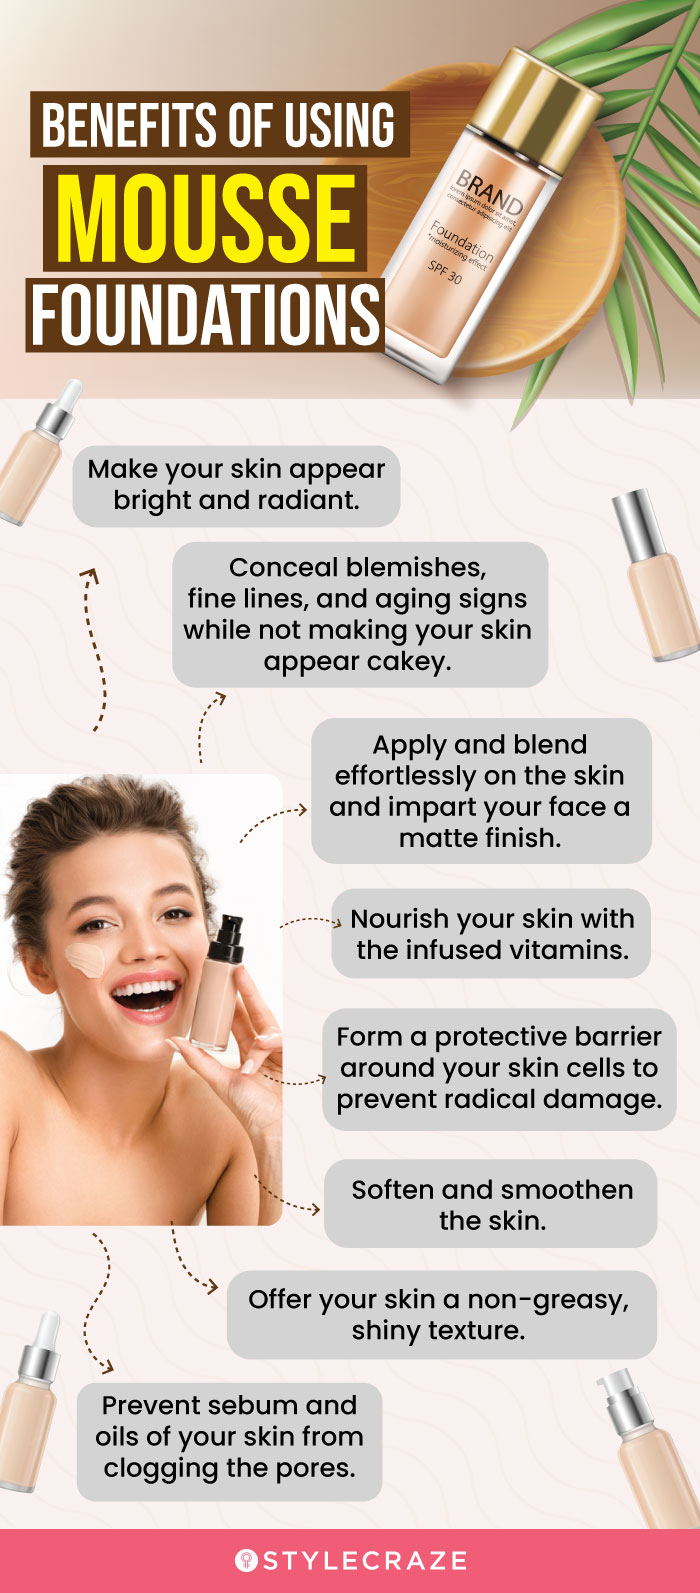 Benefits Of Using Mousse Foundations (infographic)